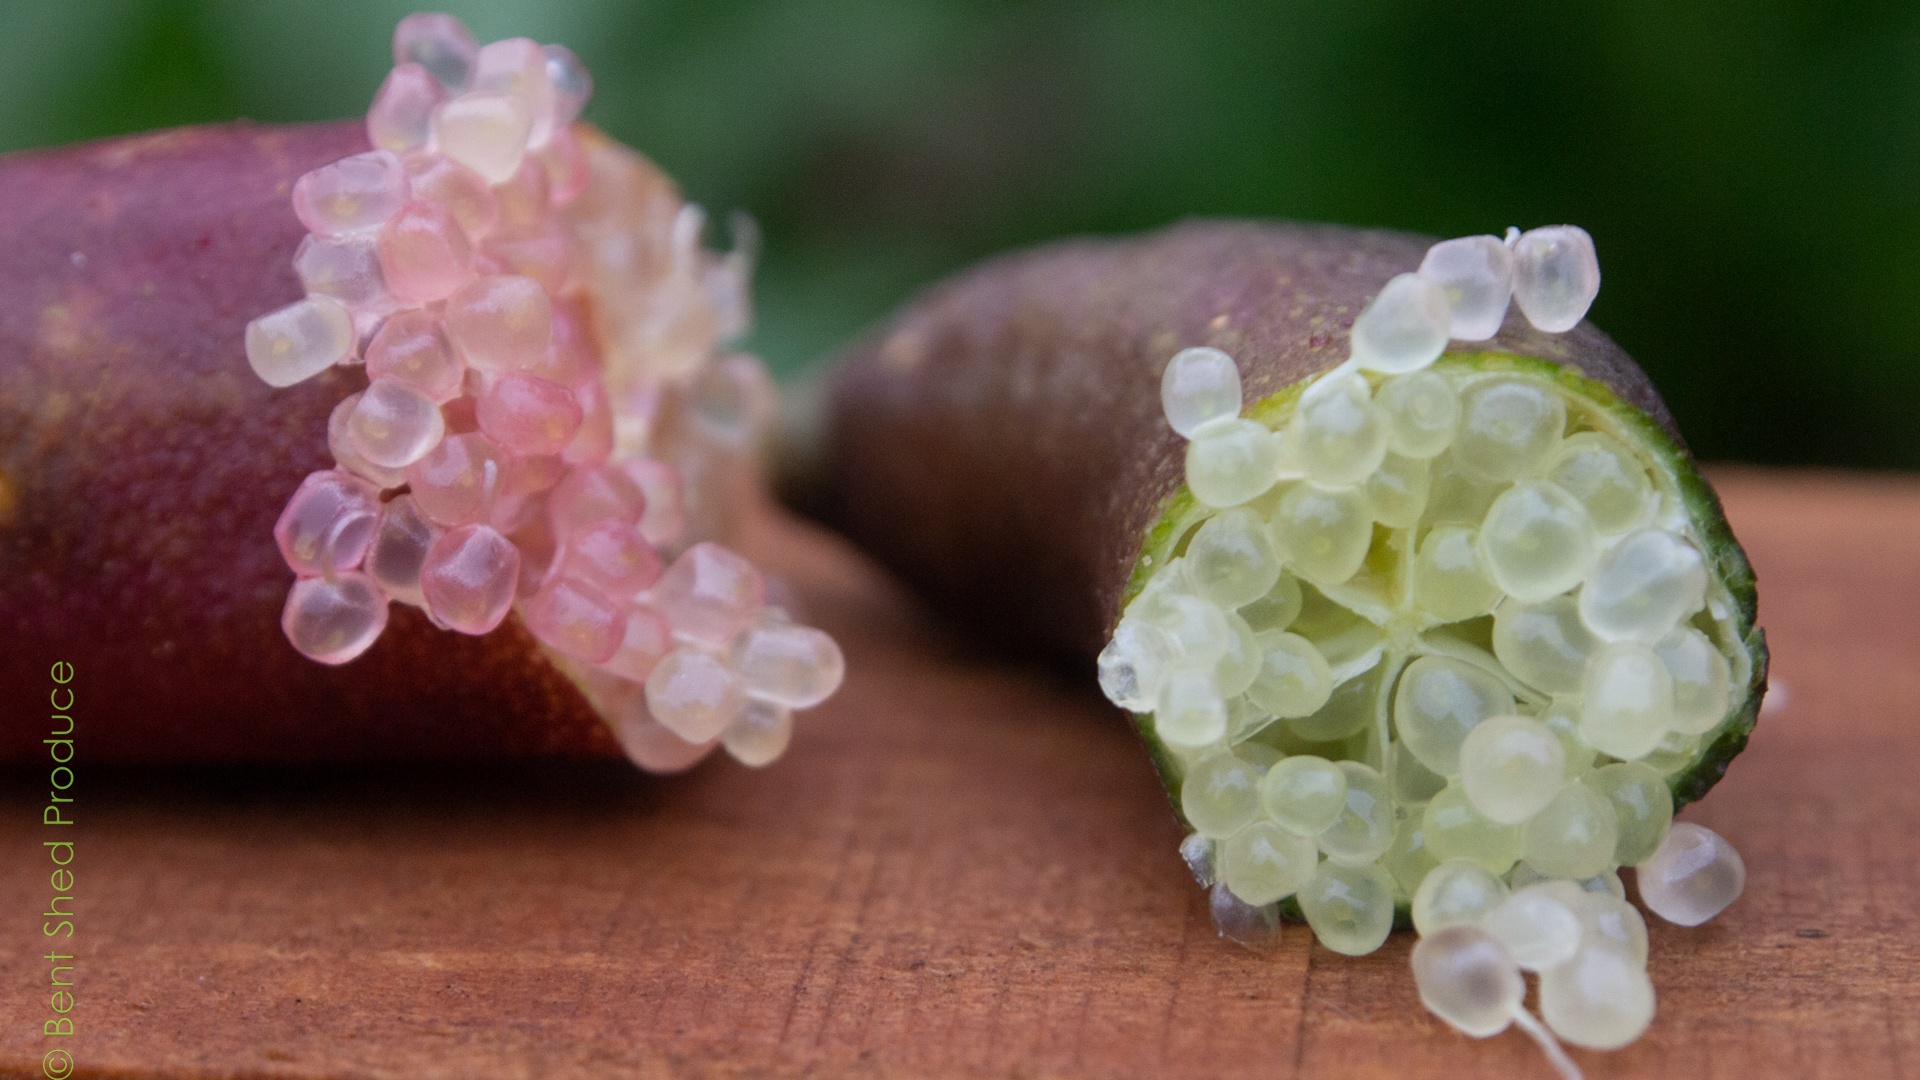 Two Finger Limes are seen in extreme close-up. The left has a pink skin and pinky bubbles, while the right has a green-purple skin and pale lime green bubbles.